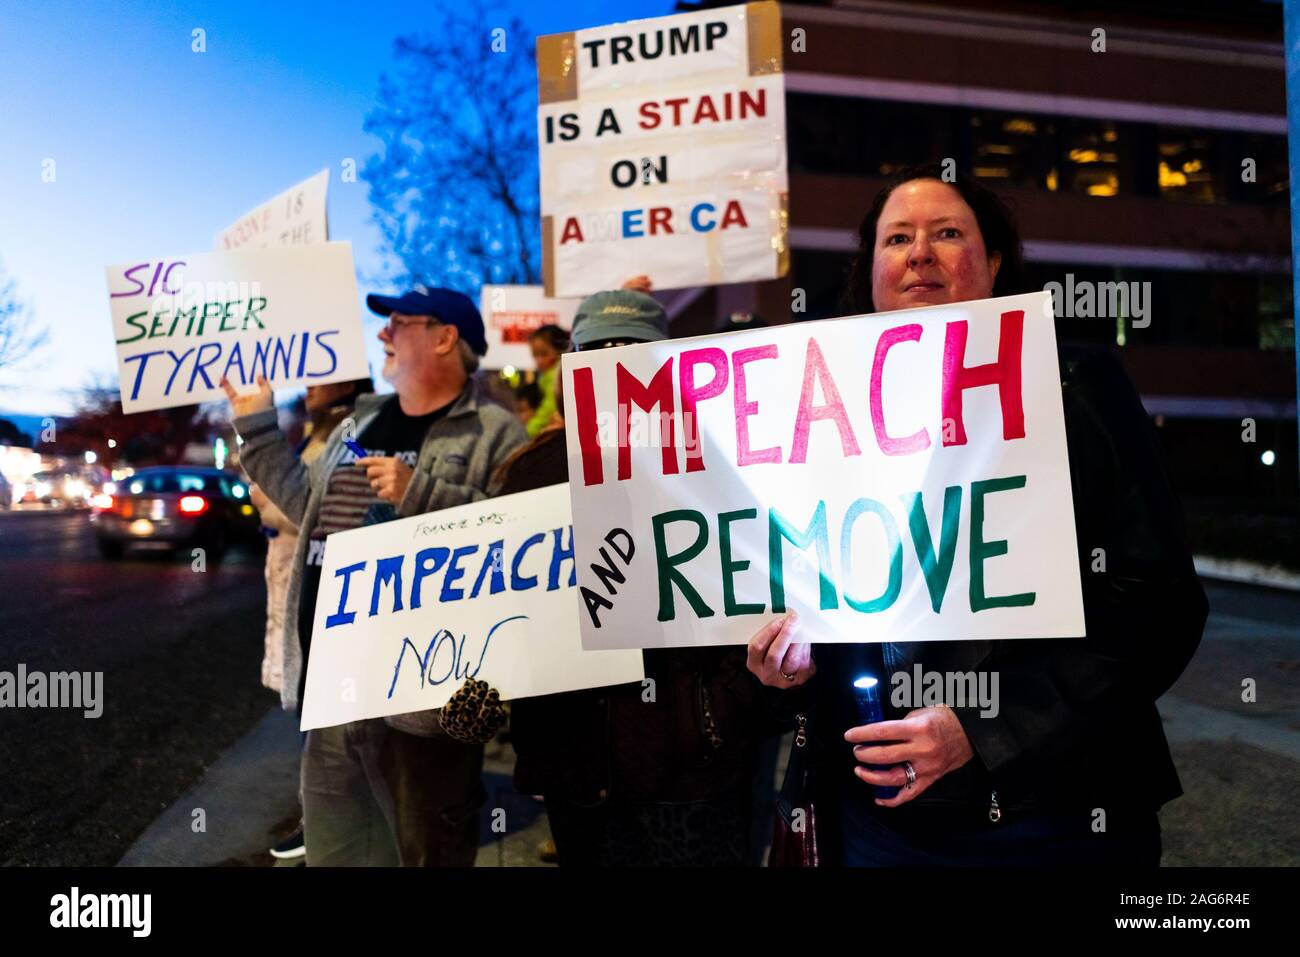 Dec 17, 2019 Mountain View / CA / USA - Impeach and remove and other signs carried by the protesters participating at the Impeachment Eve Vigil rally Stock Photo